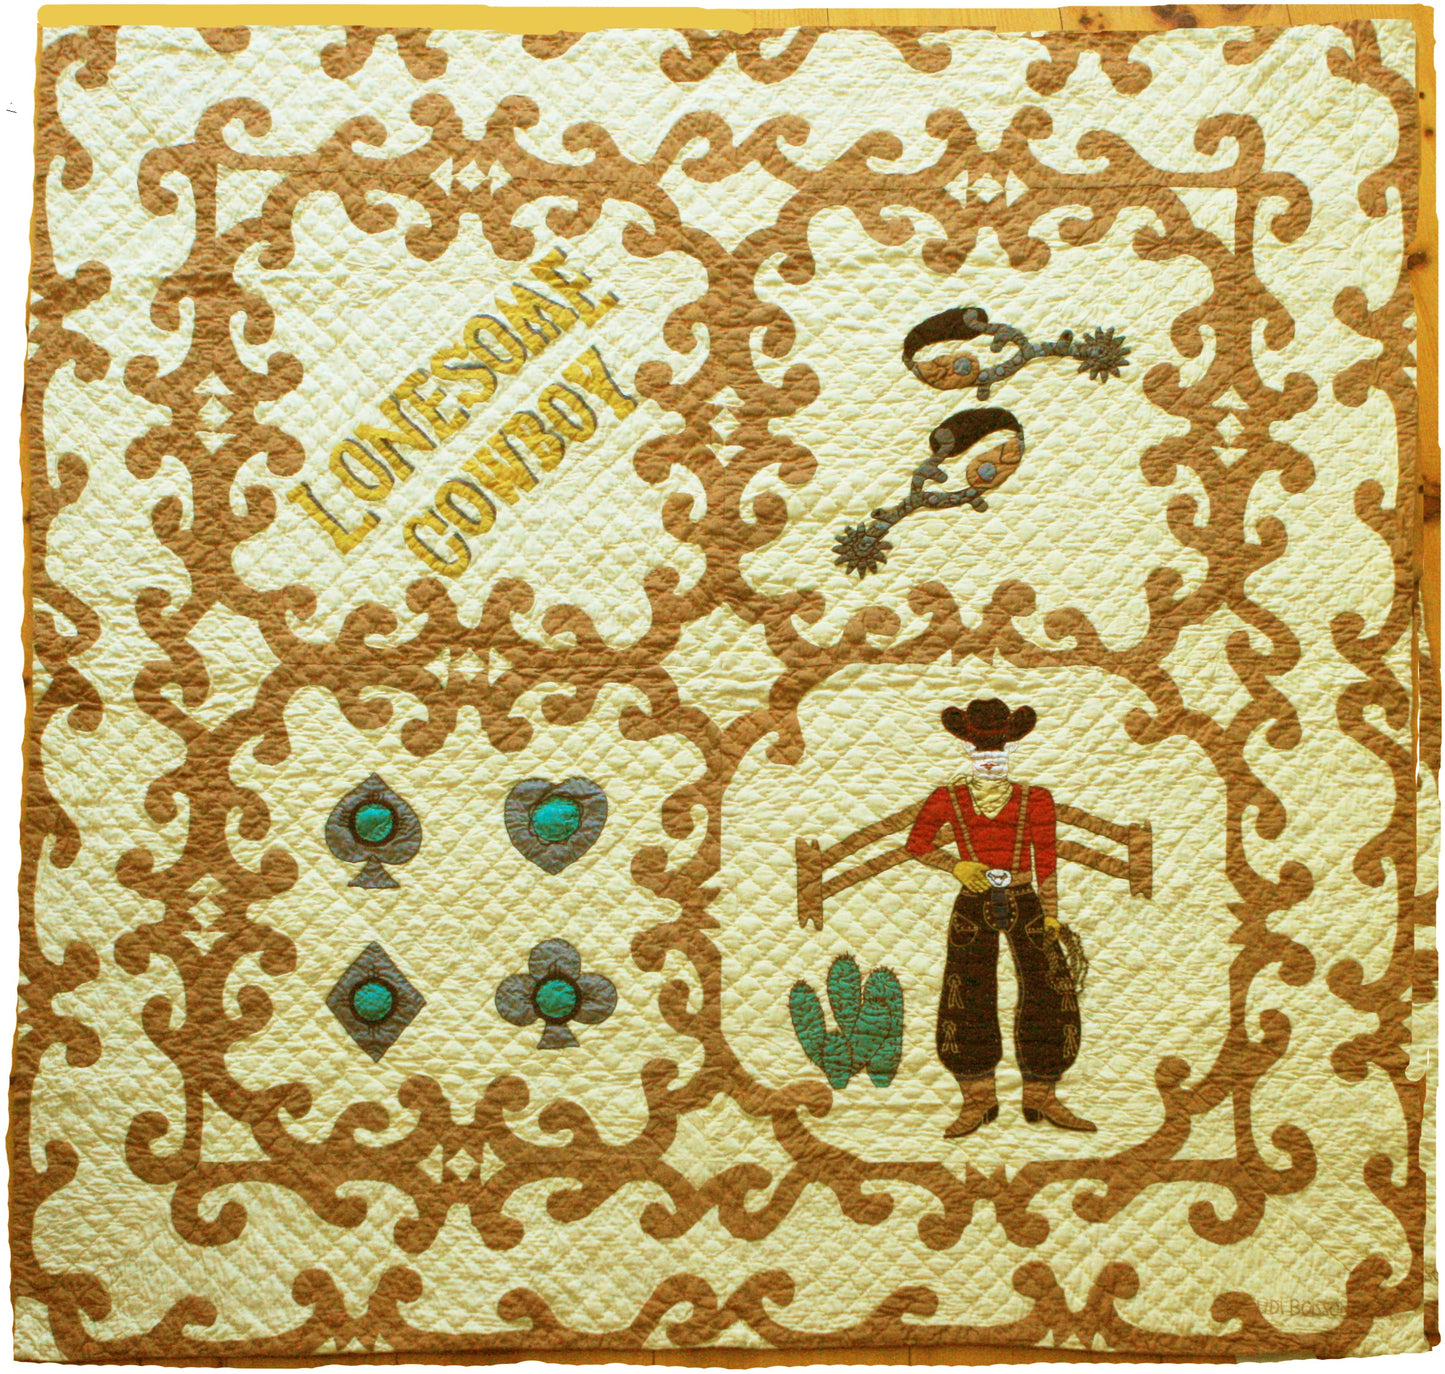 "Lonesome Cowboy" in Butter-Saddle Cover-Up Quilt 55" x 55"